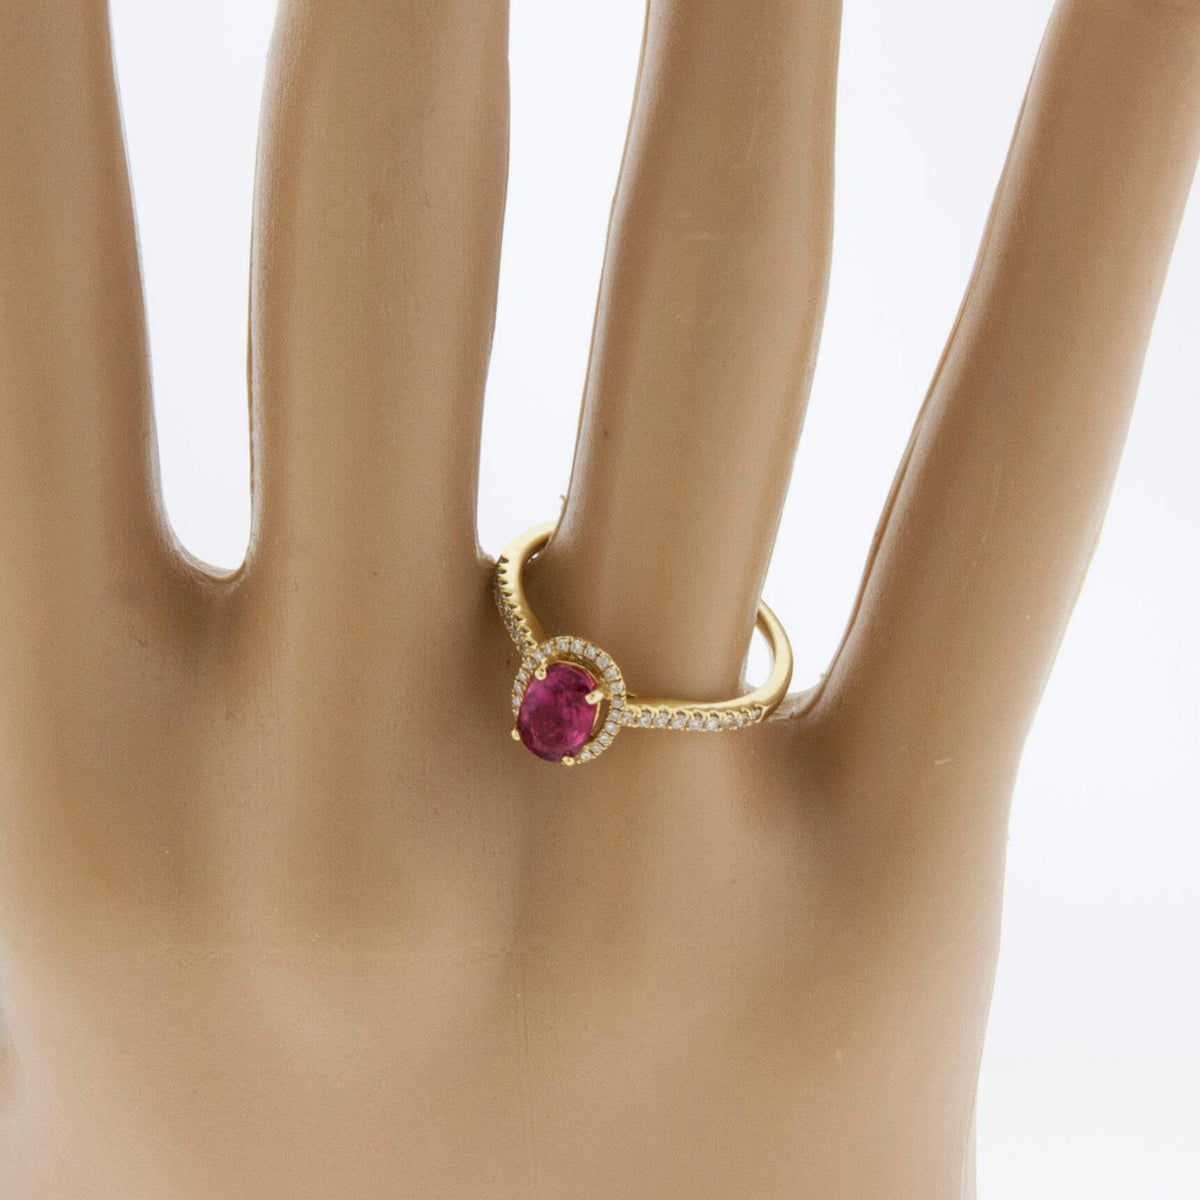 Oval Shaped Ruby and Diamond Ring - Park City Jewelers